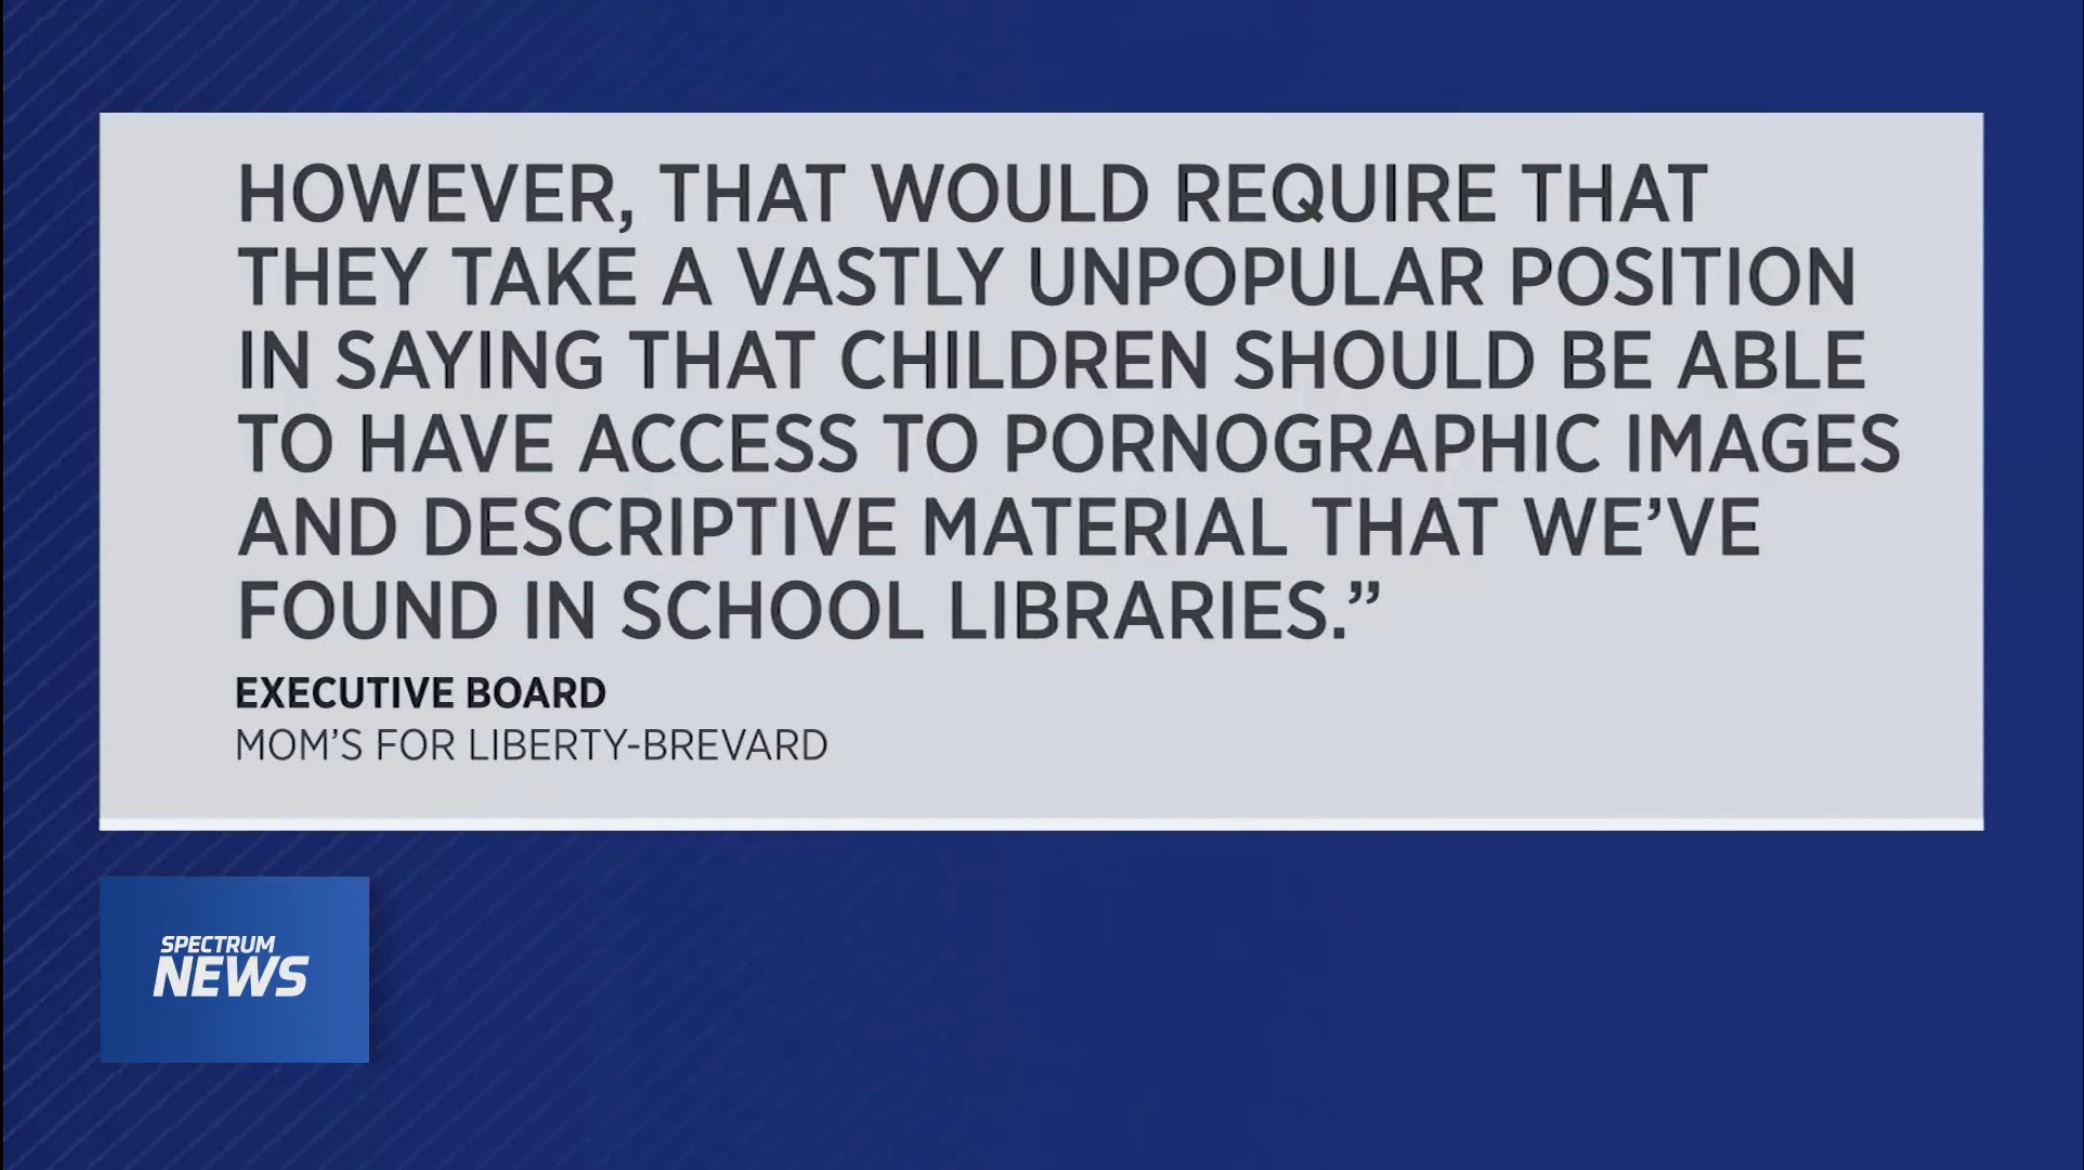 HOWEVER, THAT WOULD REQUIRE THAT THEY TAKE A VASTLY UNPOPULAR POSITION IN SAYING THAT CHILDREN SHOULD BE ABLE TO HAVE ACCESS TO PORNOGRAPHIC IMAGES AND DESCRIPTIVE MATERIAL THAT WE'VE FOUND IN SCHOOL LIBRARIES. EXECUTIVE BOARD MOM'S FOR LIBERTY-BREVARD